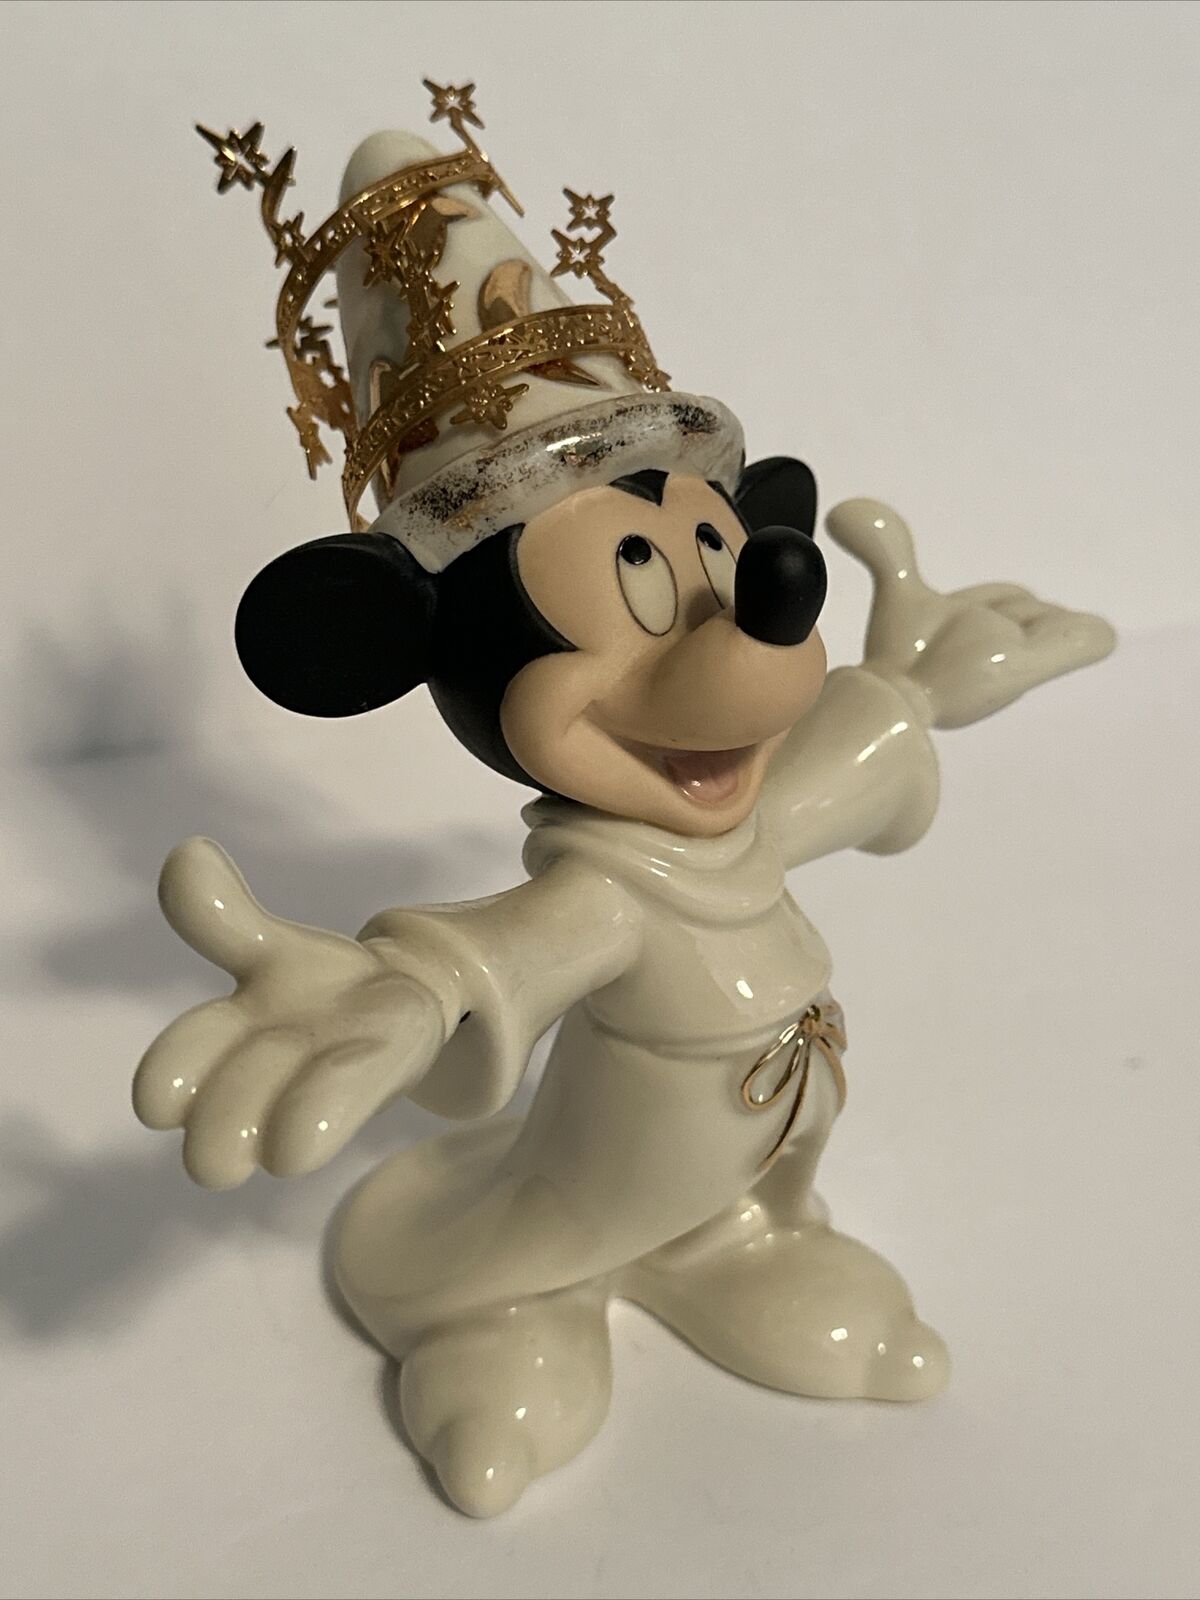 Disney Lenox Mickey's Magic Moment Figurine 24kt Gold Accents Mickey Mouse Box +